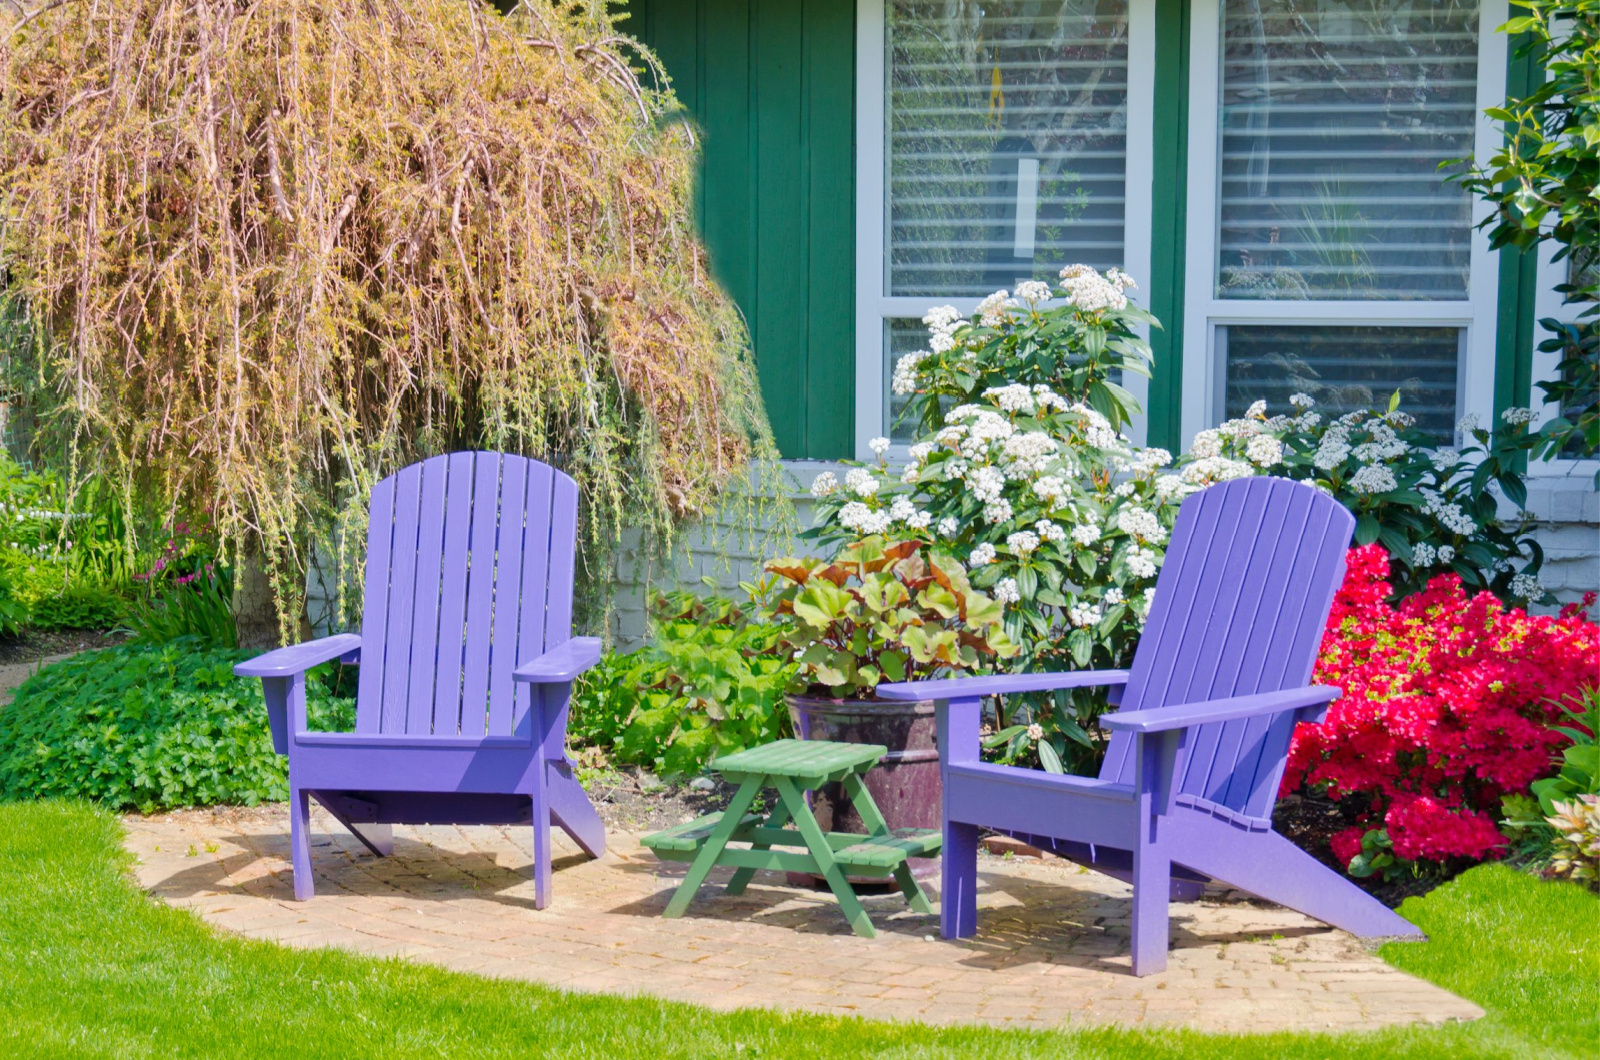 Two wooden lawn chairs in the front yard